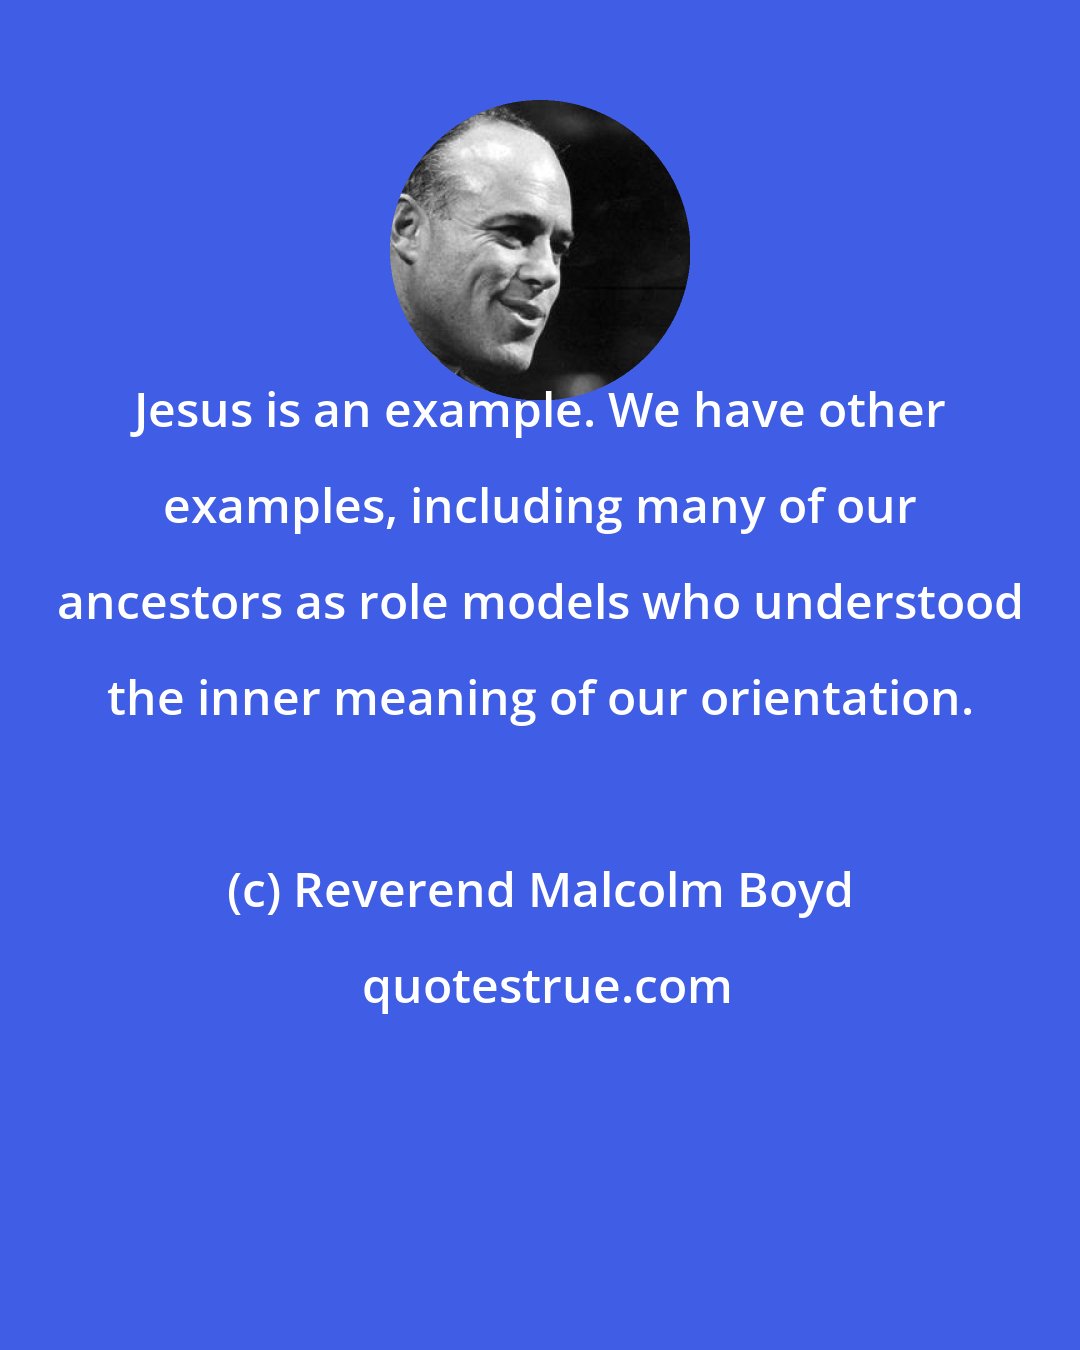 Reverend Malcolm Boyd: Jesus is an example. We have other examples, including many of our ancestors as role models who understood the inner meaning of our orientation.